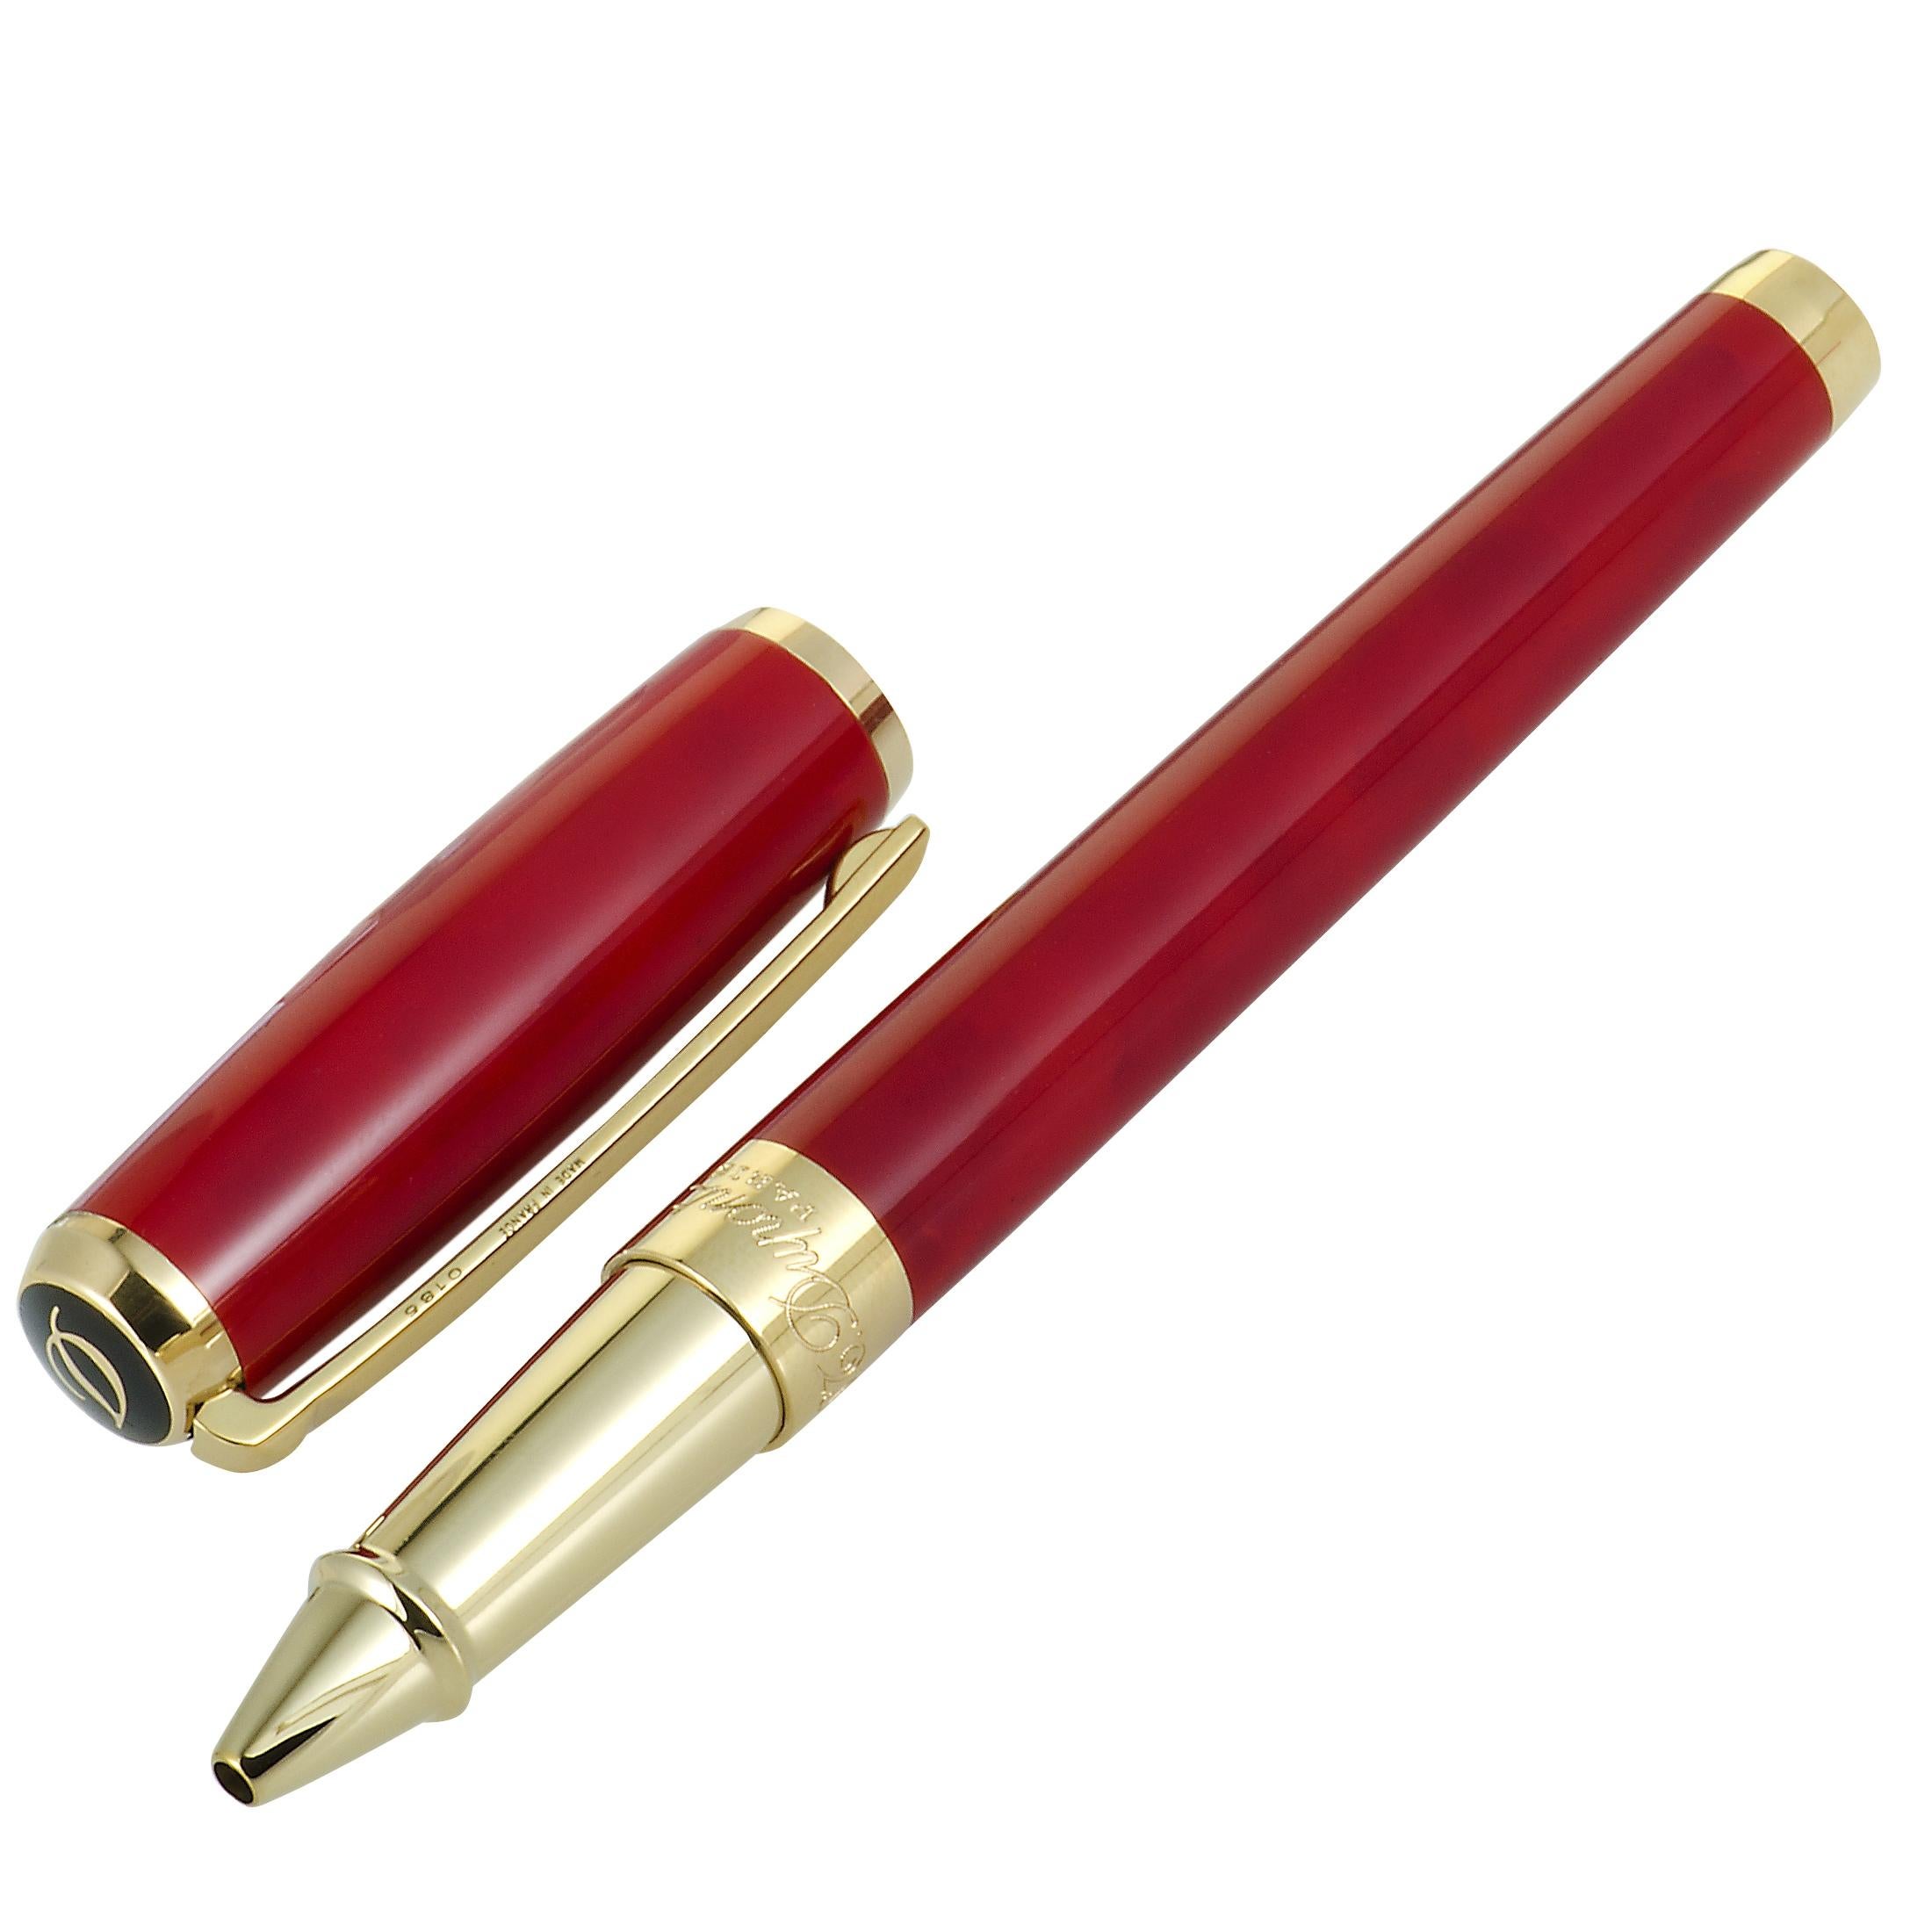 Between the splendidly classic, sleek design and stunning red Chinese lacquer, this fascinating rollerball pen is a vision of luxe elegance. The pen is presented by S.T. Dupont within the refined “Atelier” line.